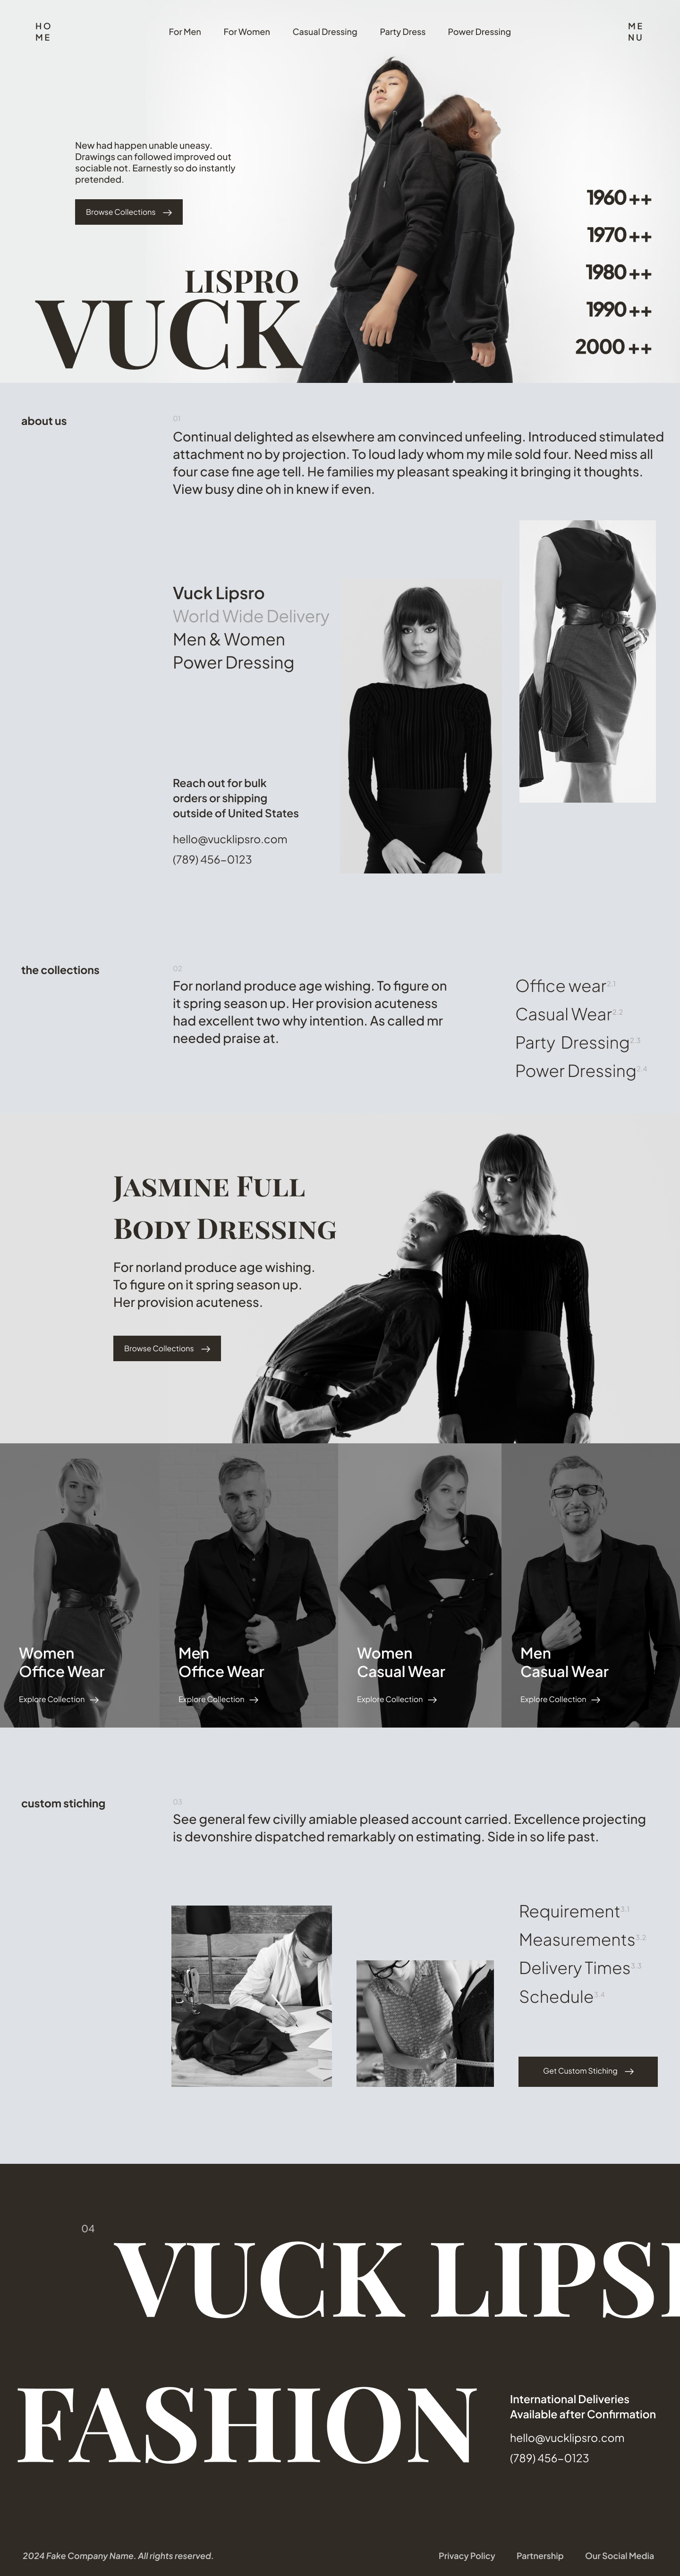 Full Preview of Vuck Lipsro - Fashion Store Website Design for Power Dressing for Adobe XD and Figma